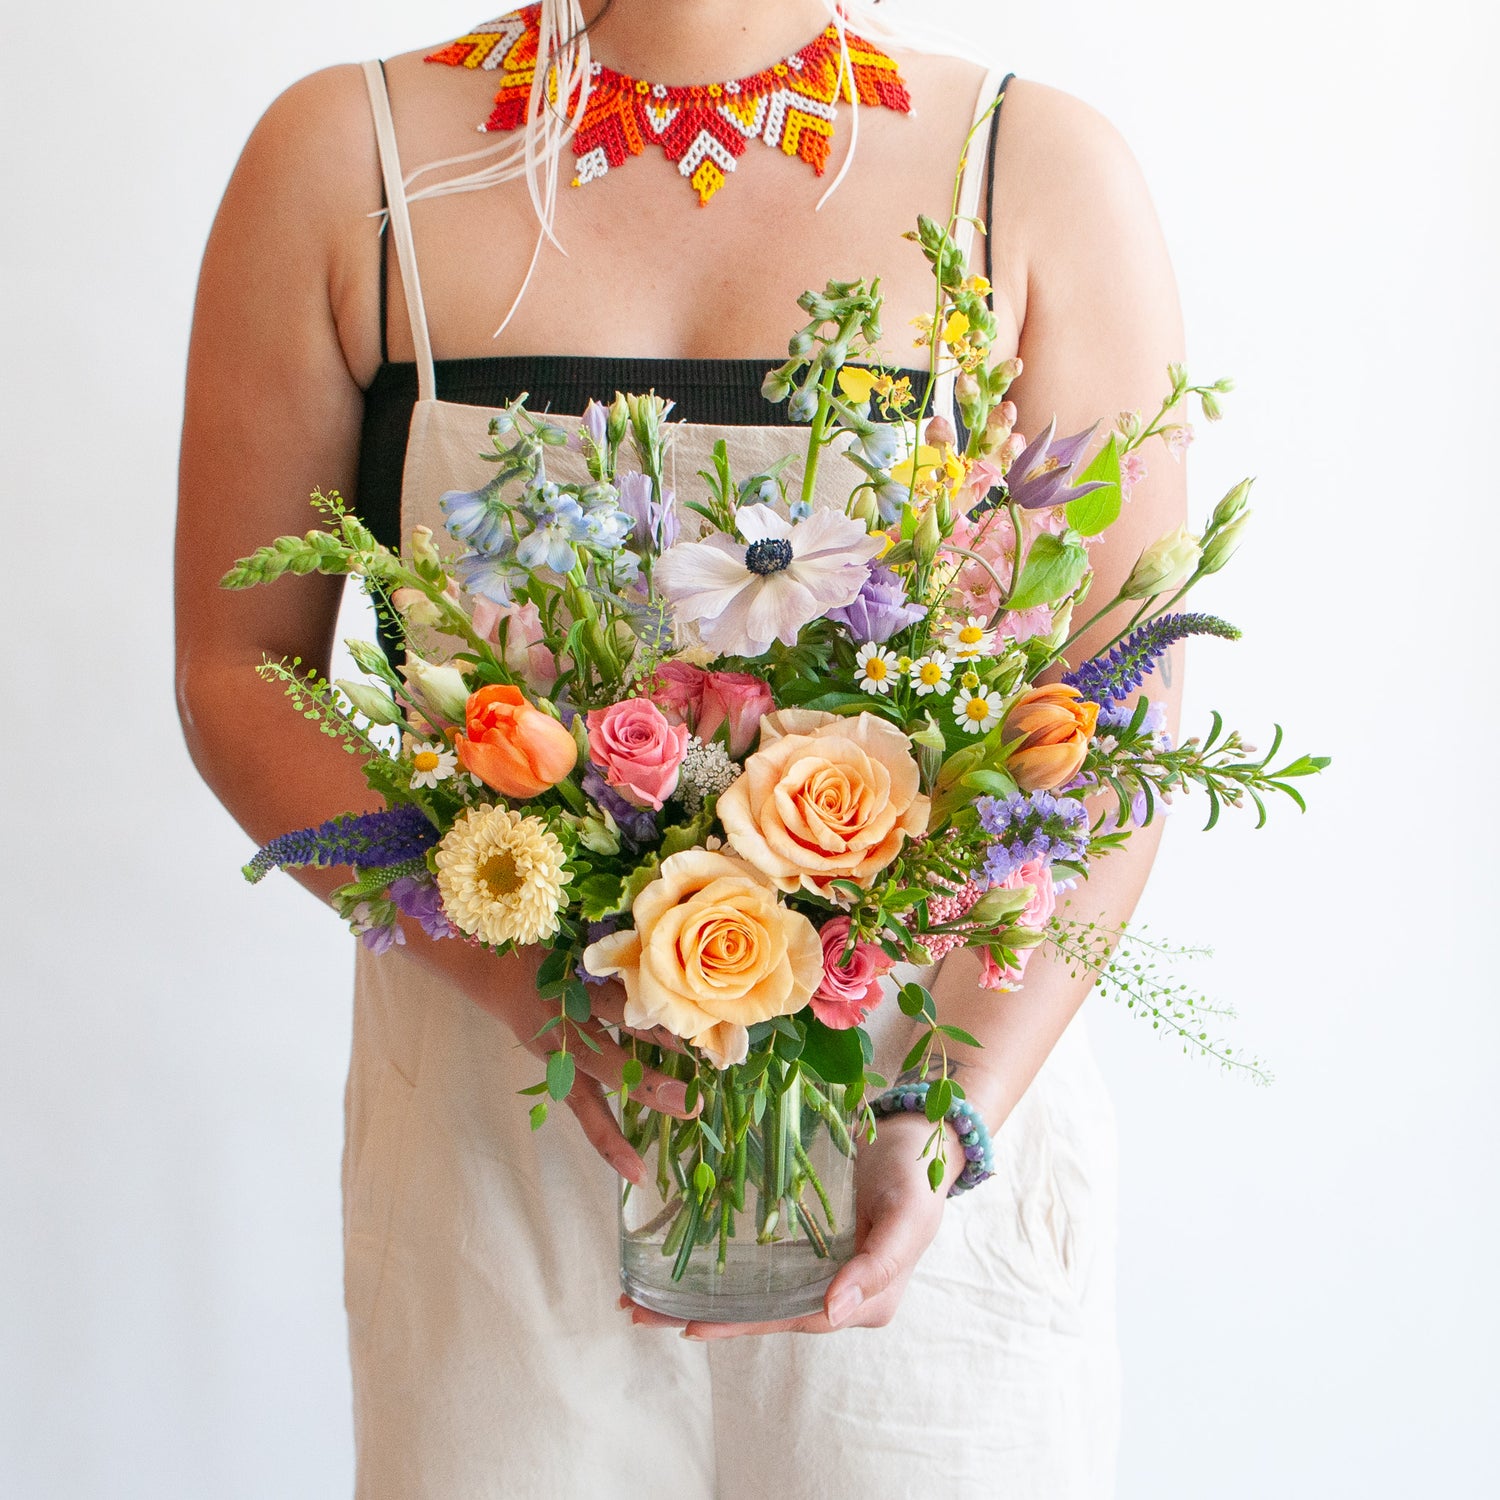 A woman in cream overalls holds a glass vase with a petite flower arrangement in it.  The flowers are many colors and include roses, tulips, snapdragon, veronica, anemone, clematis, orchids, and delphinium.